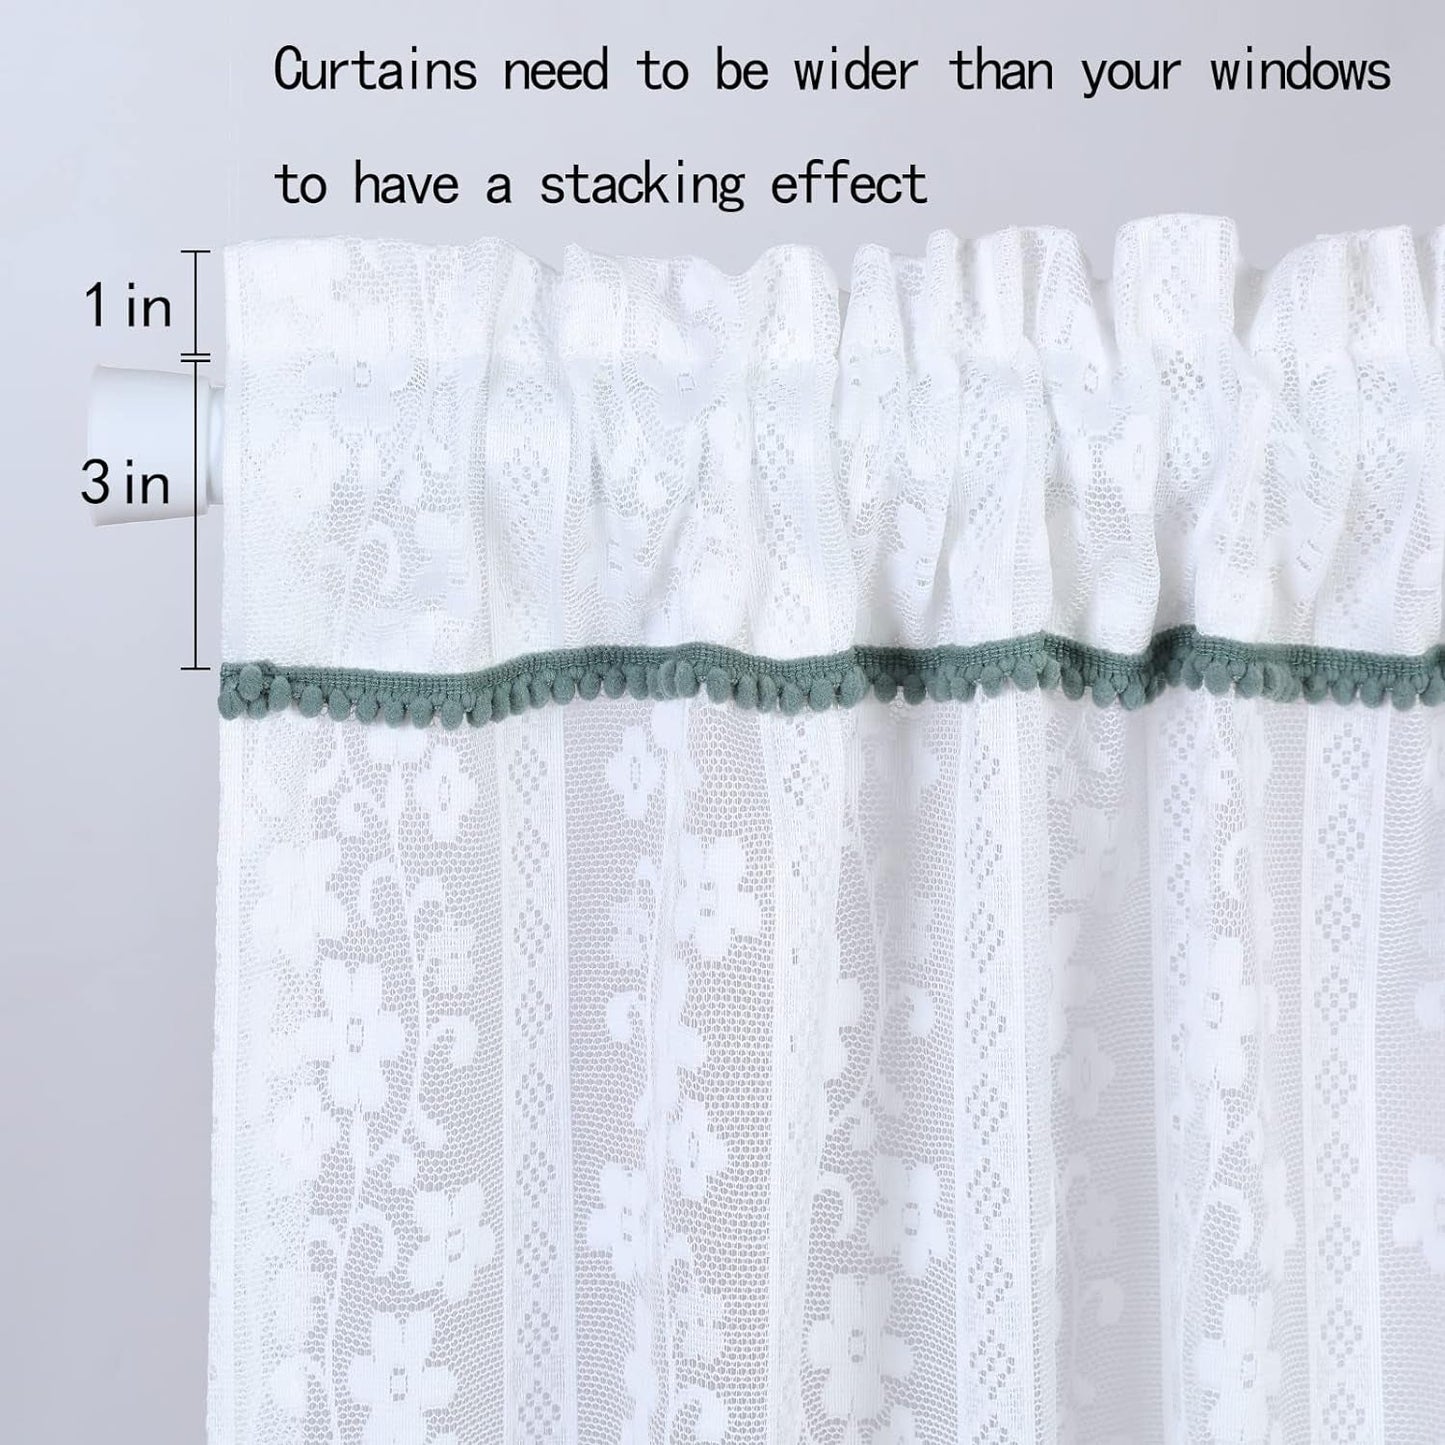 Elegant Floral Design Lace Valance Sheer for Windows 78X16Inch. White Embroidered Curtain for Kitchen Door Cafe Dinning Bath Room 1 Pcs